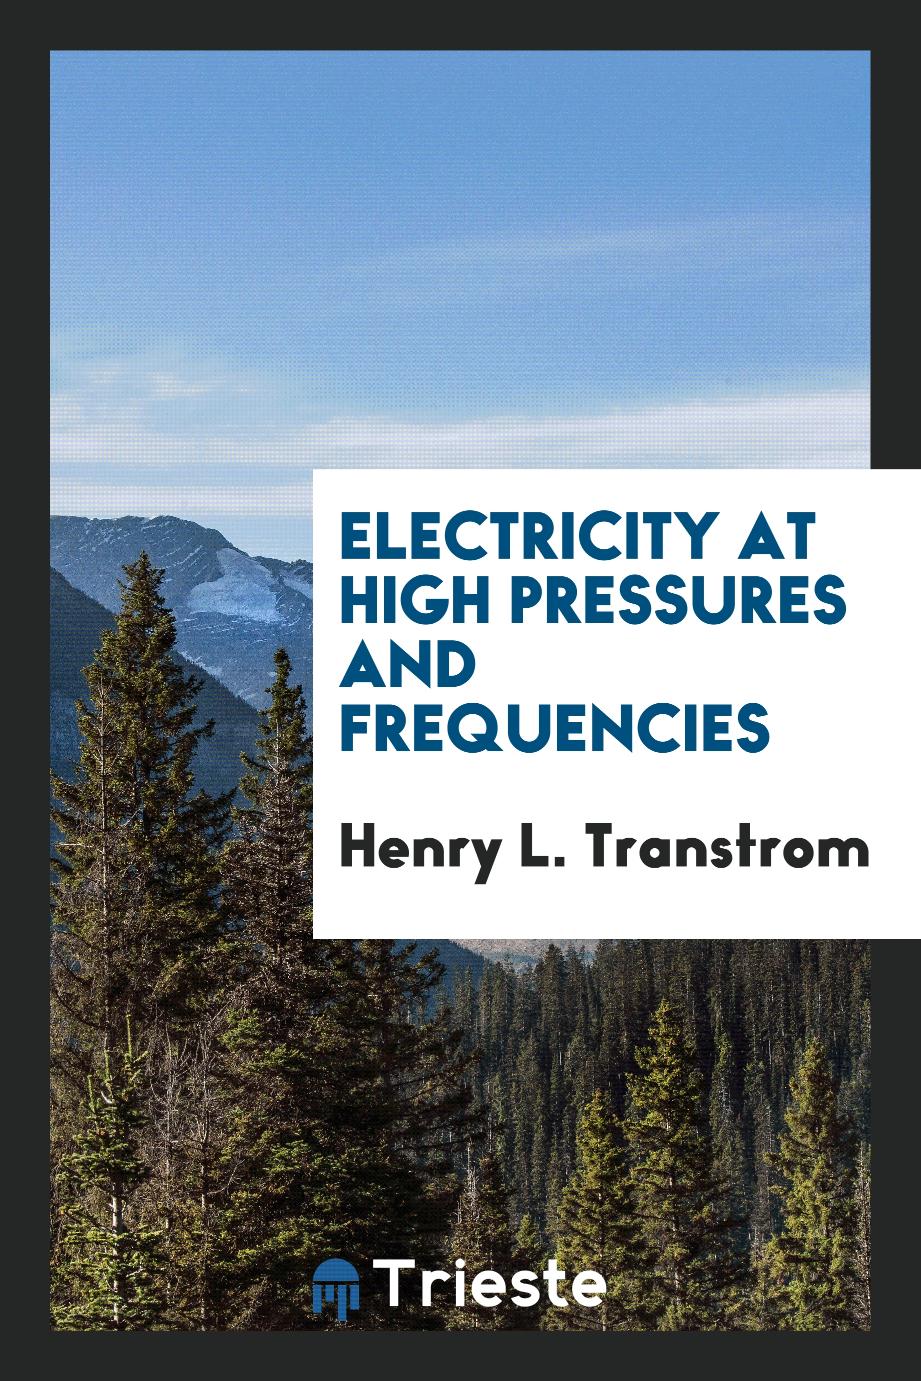 Henry L. Transtrom - Electricity at High Pressures and Frequencies